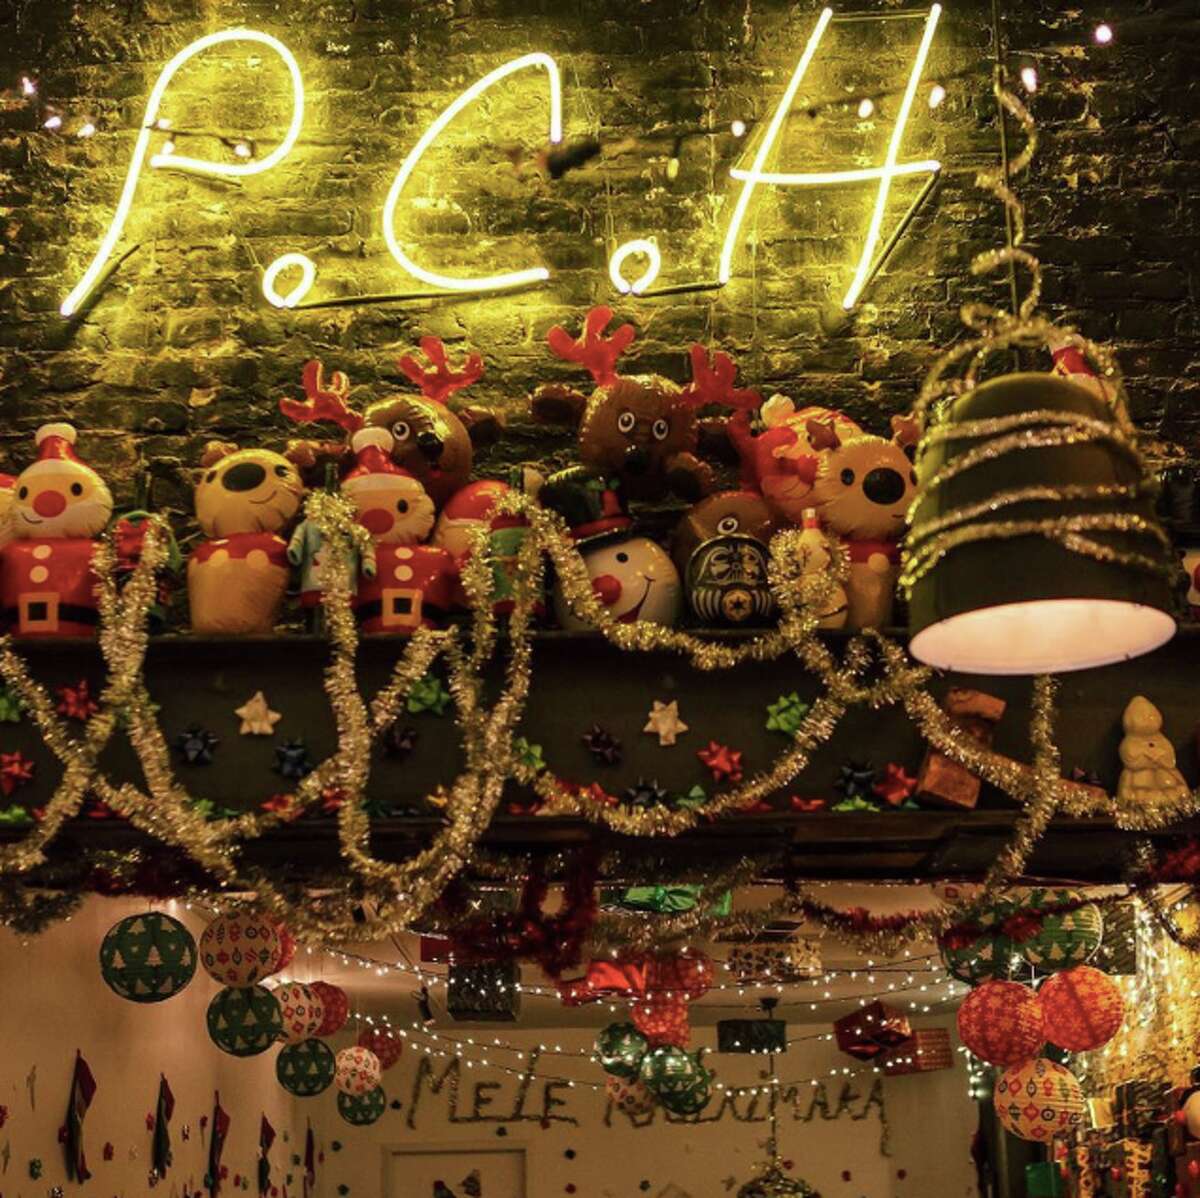 Pacific Cocktail Haven will transform into Miracle, a Christmas-themed pop-up, this holiday season.